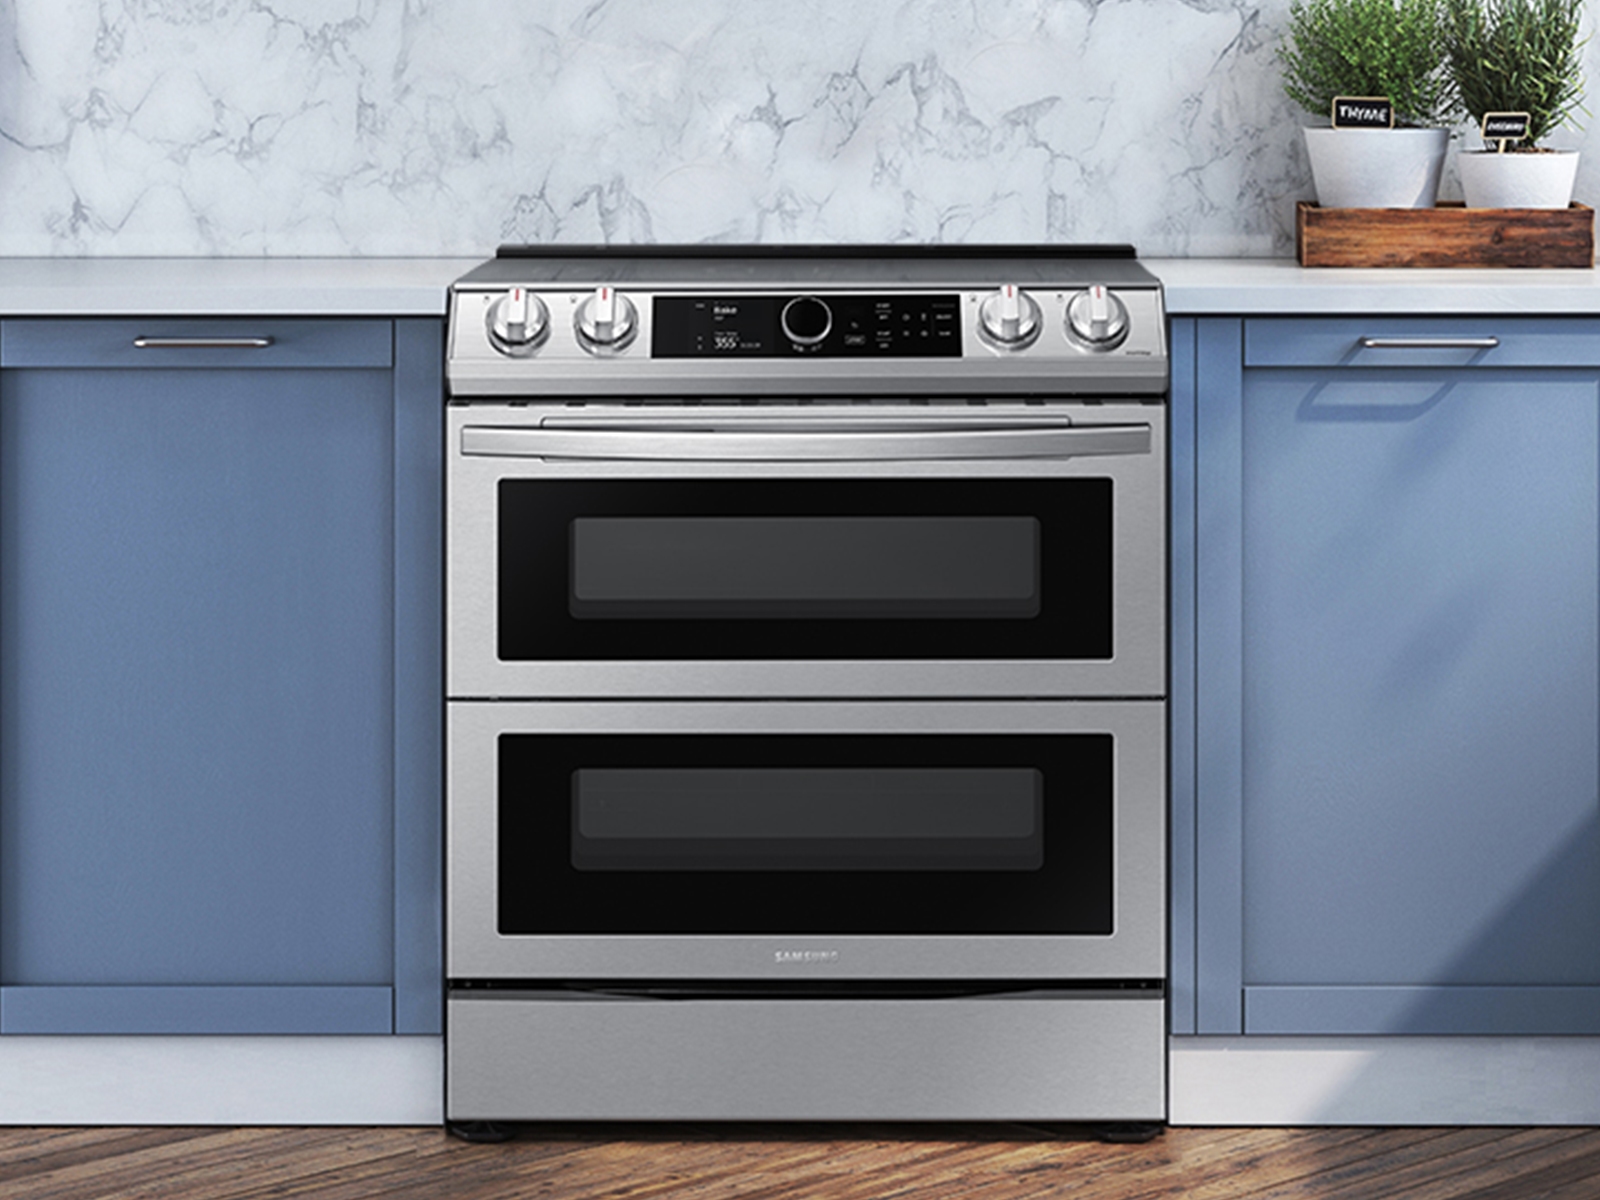 NE63A6751SG Samsung 6.3 cu. ft. Smart Freestanding Electric Range with Flex  Duo™, No-Preheat Air Fry & Griddle in Black Stainless Steel BLACK STAINLESS  STEEL - Hahn Appliance Warehouse